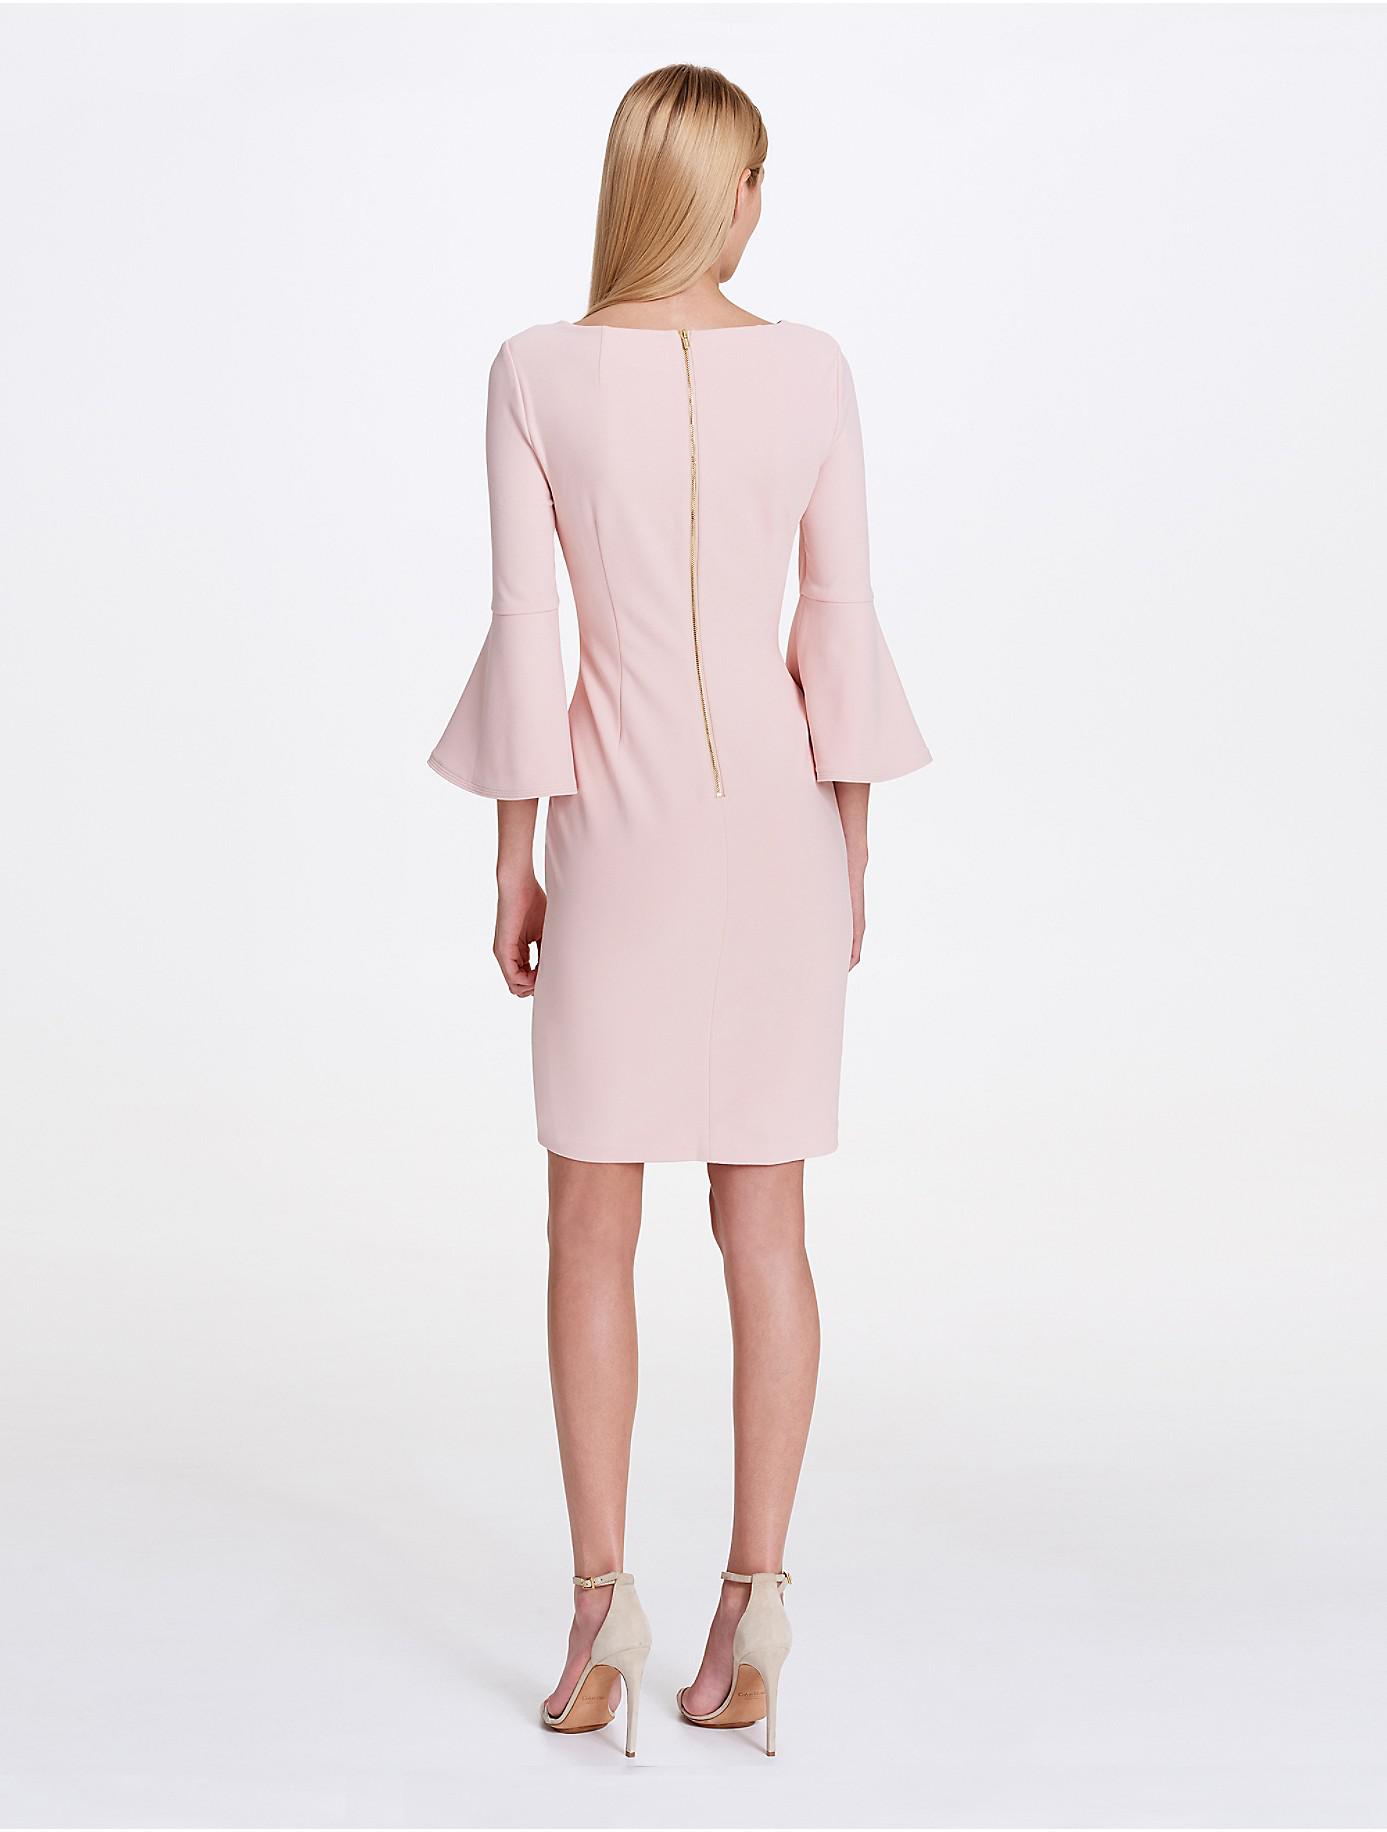 Lyst - Calvin Klein 205W39Nyc Bell Sleeve Crepe Dress in Pink